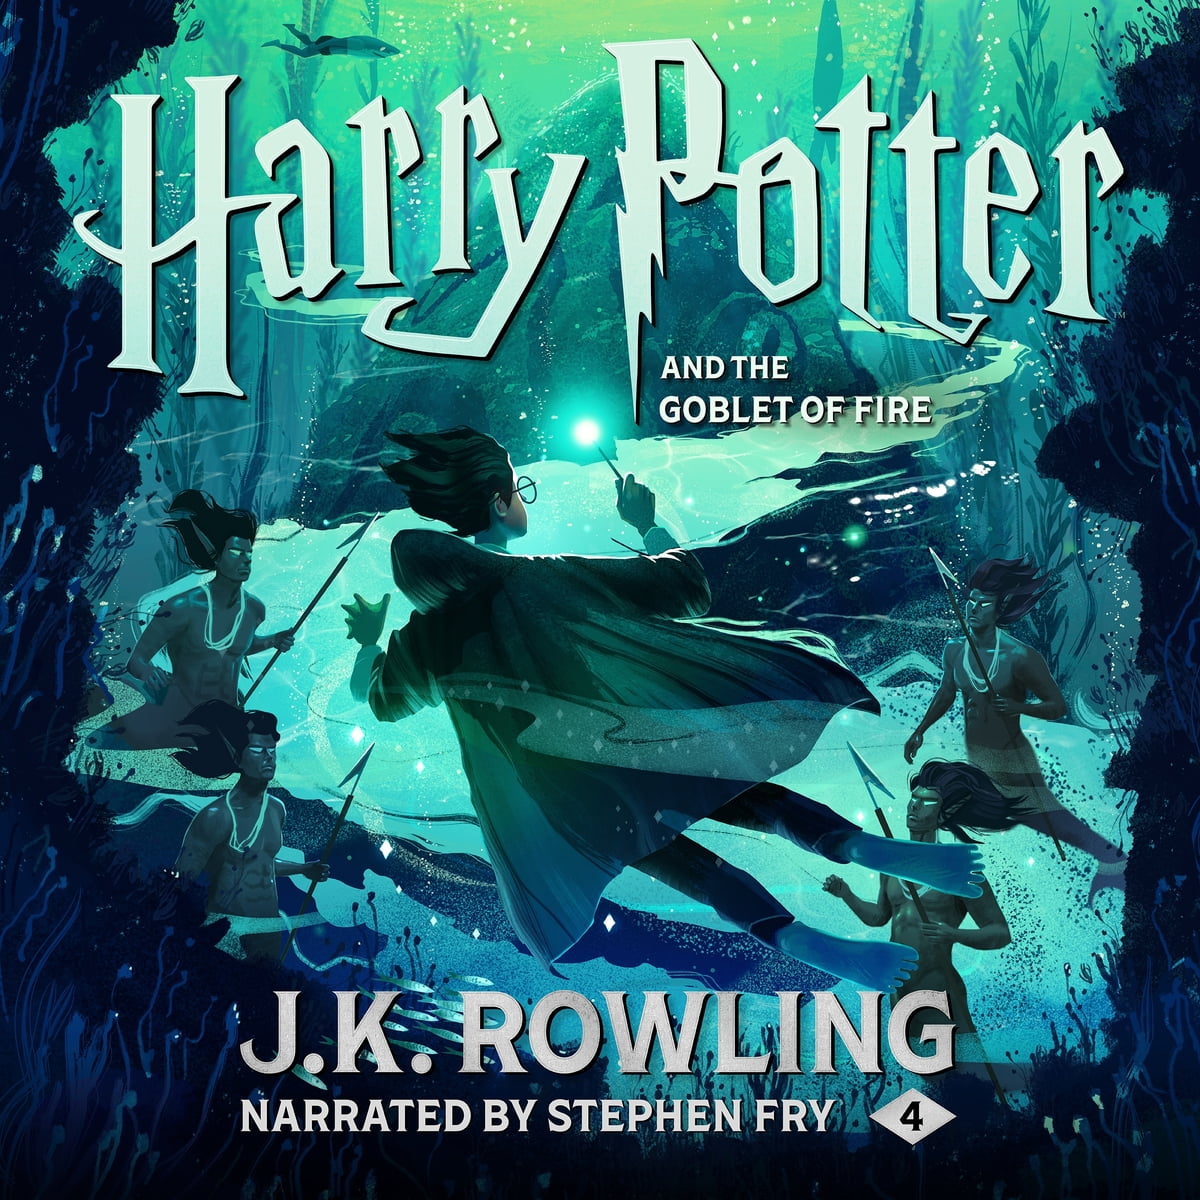 How can I adjust the narrator's intonation in the Harry Potter audiobooks? 2